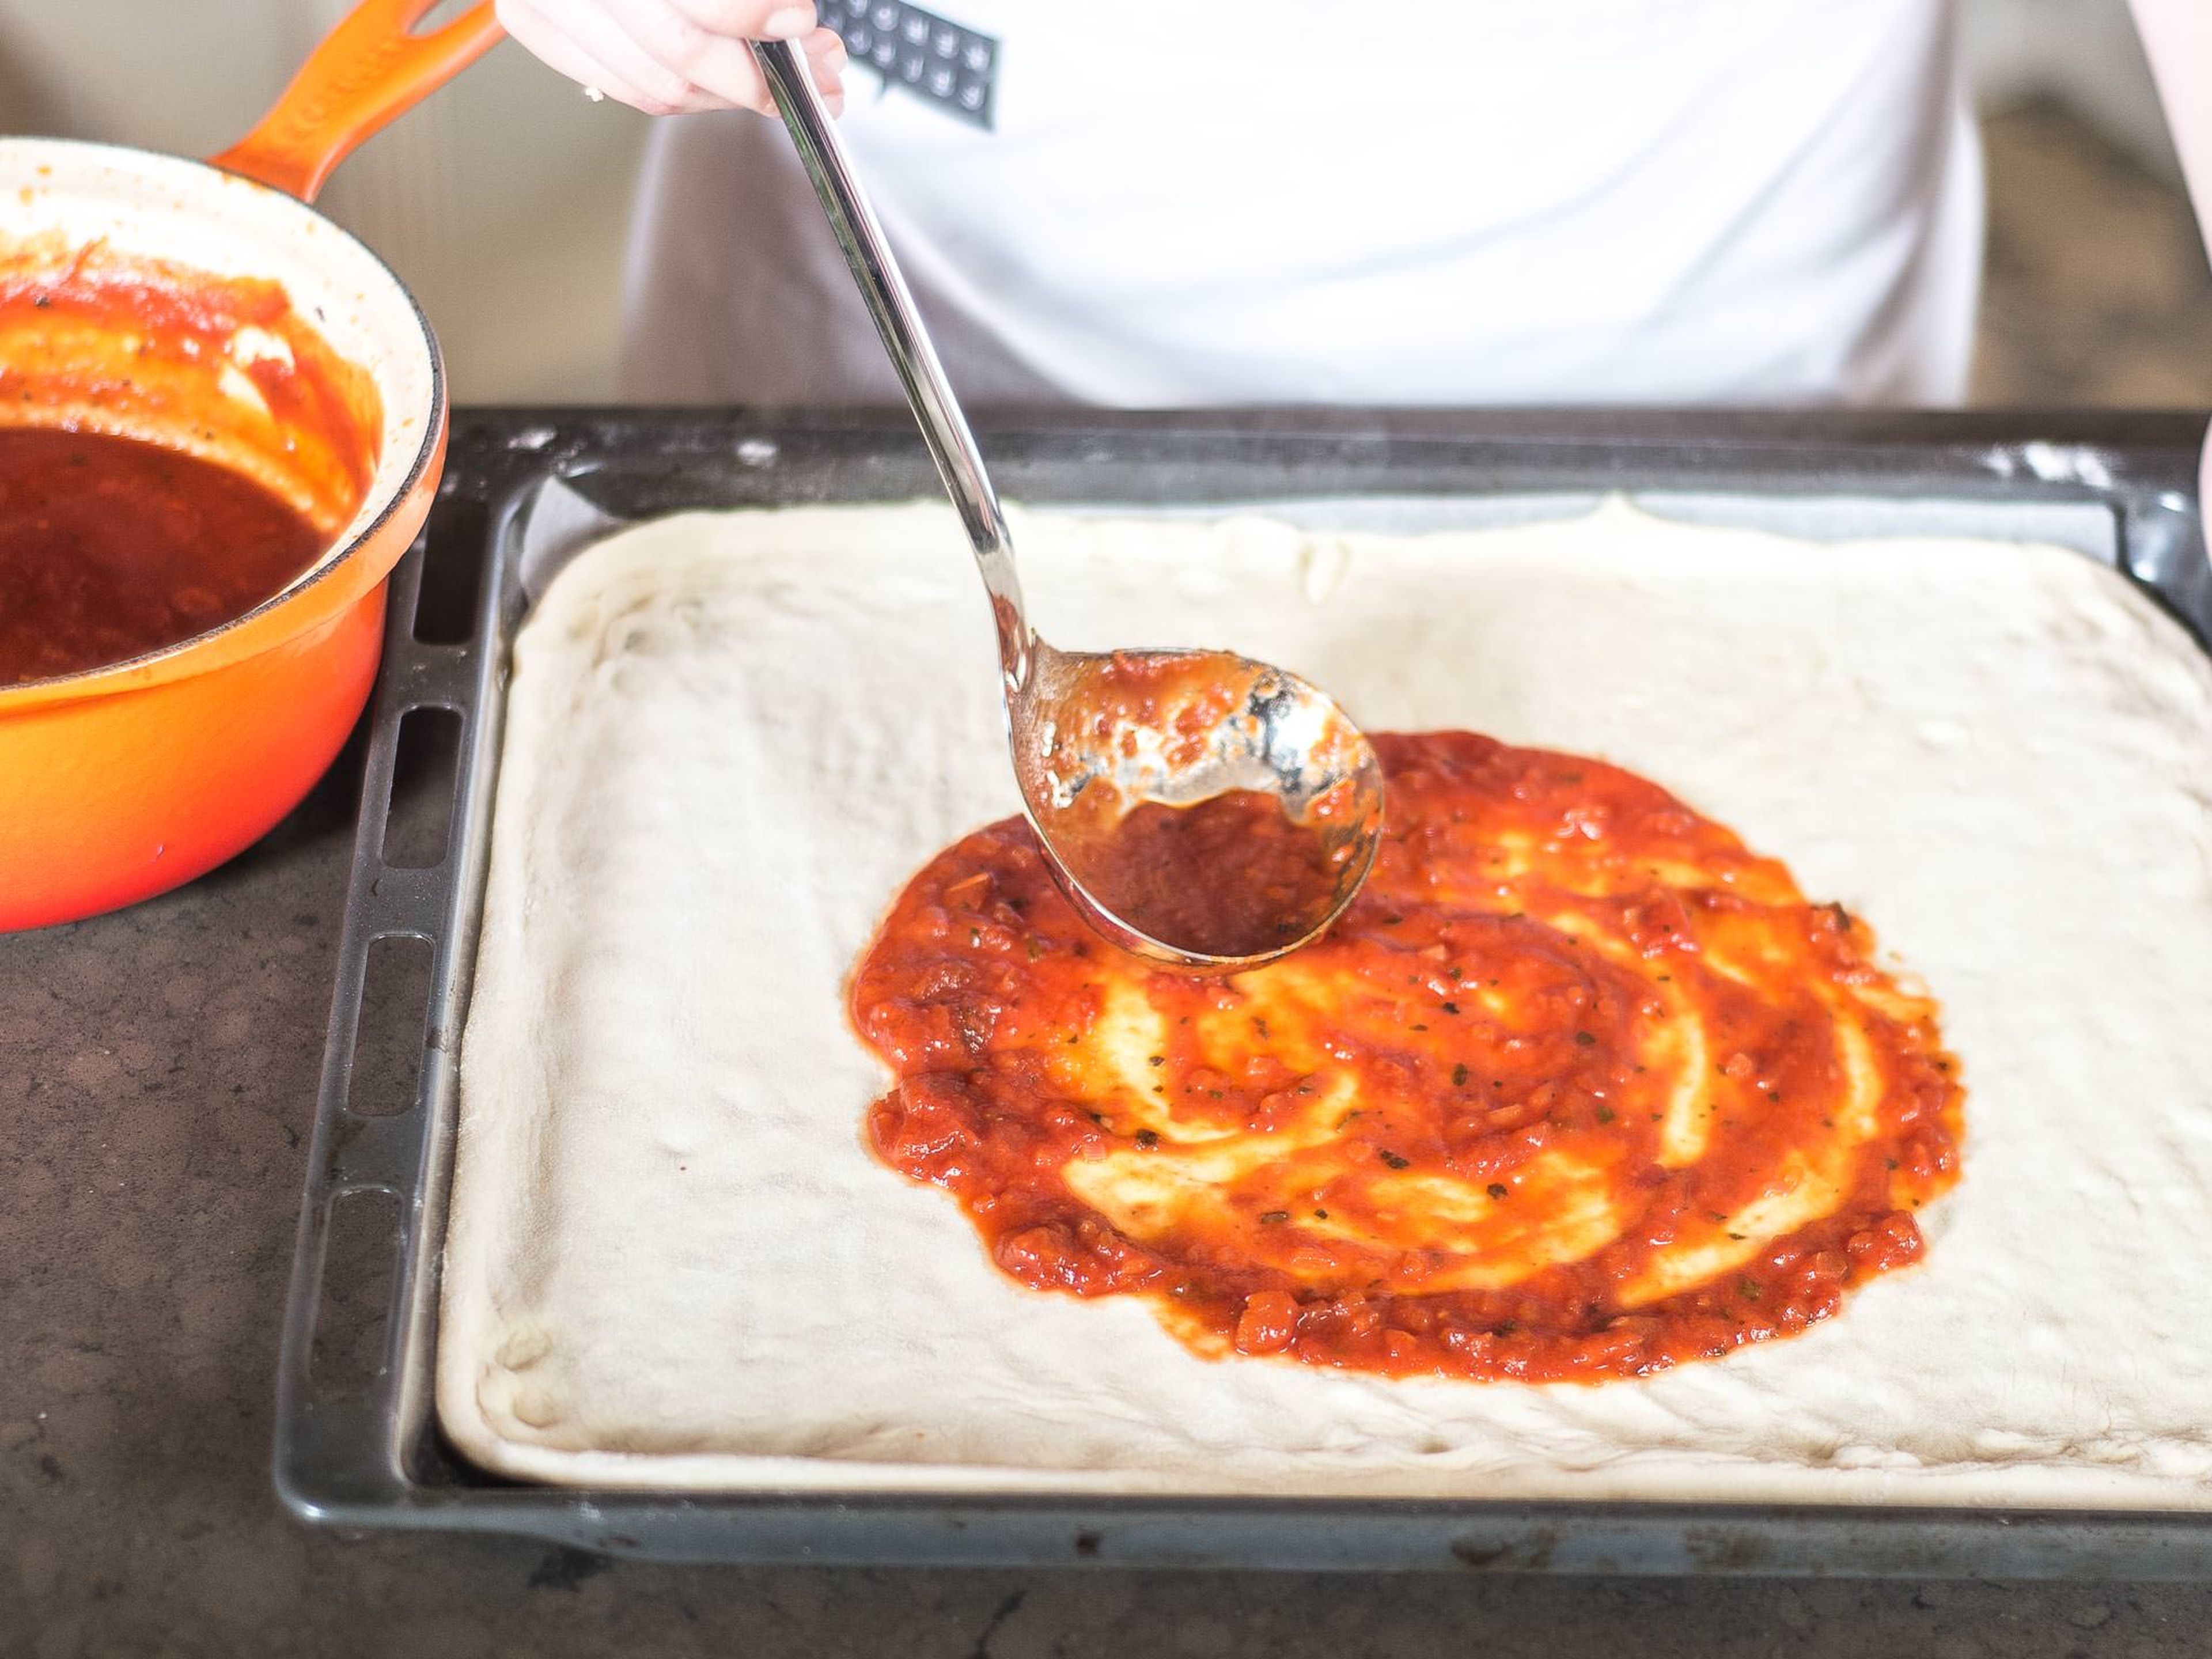 Using a ladle, spread the tomato sauce evenly on the dough.